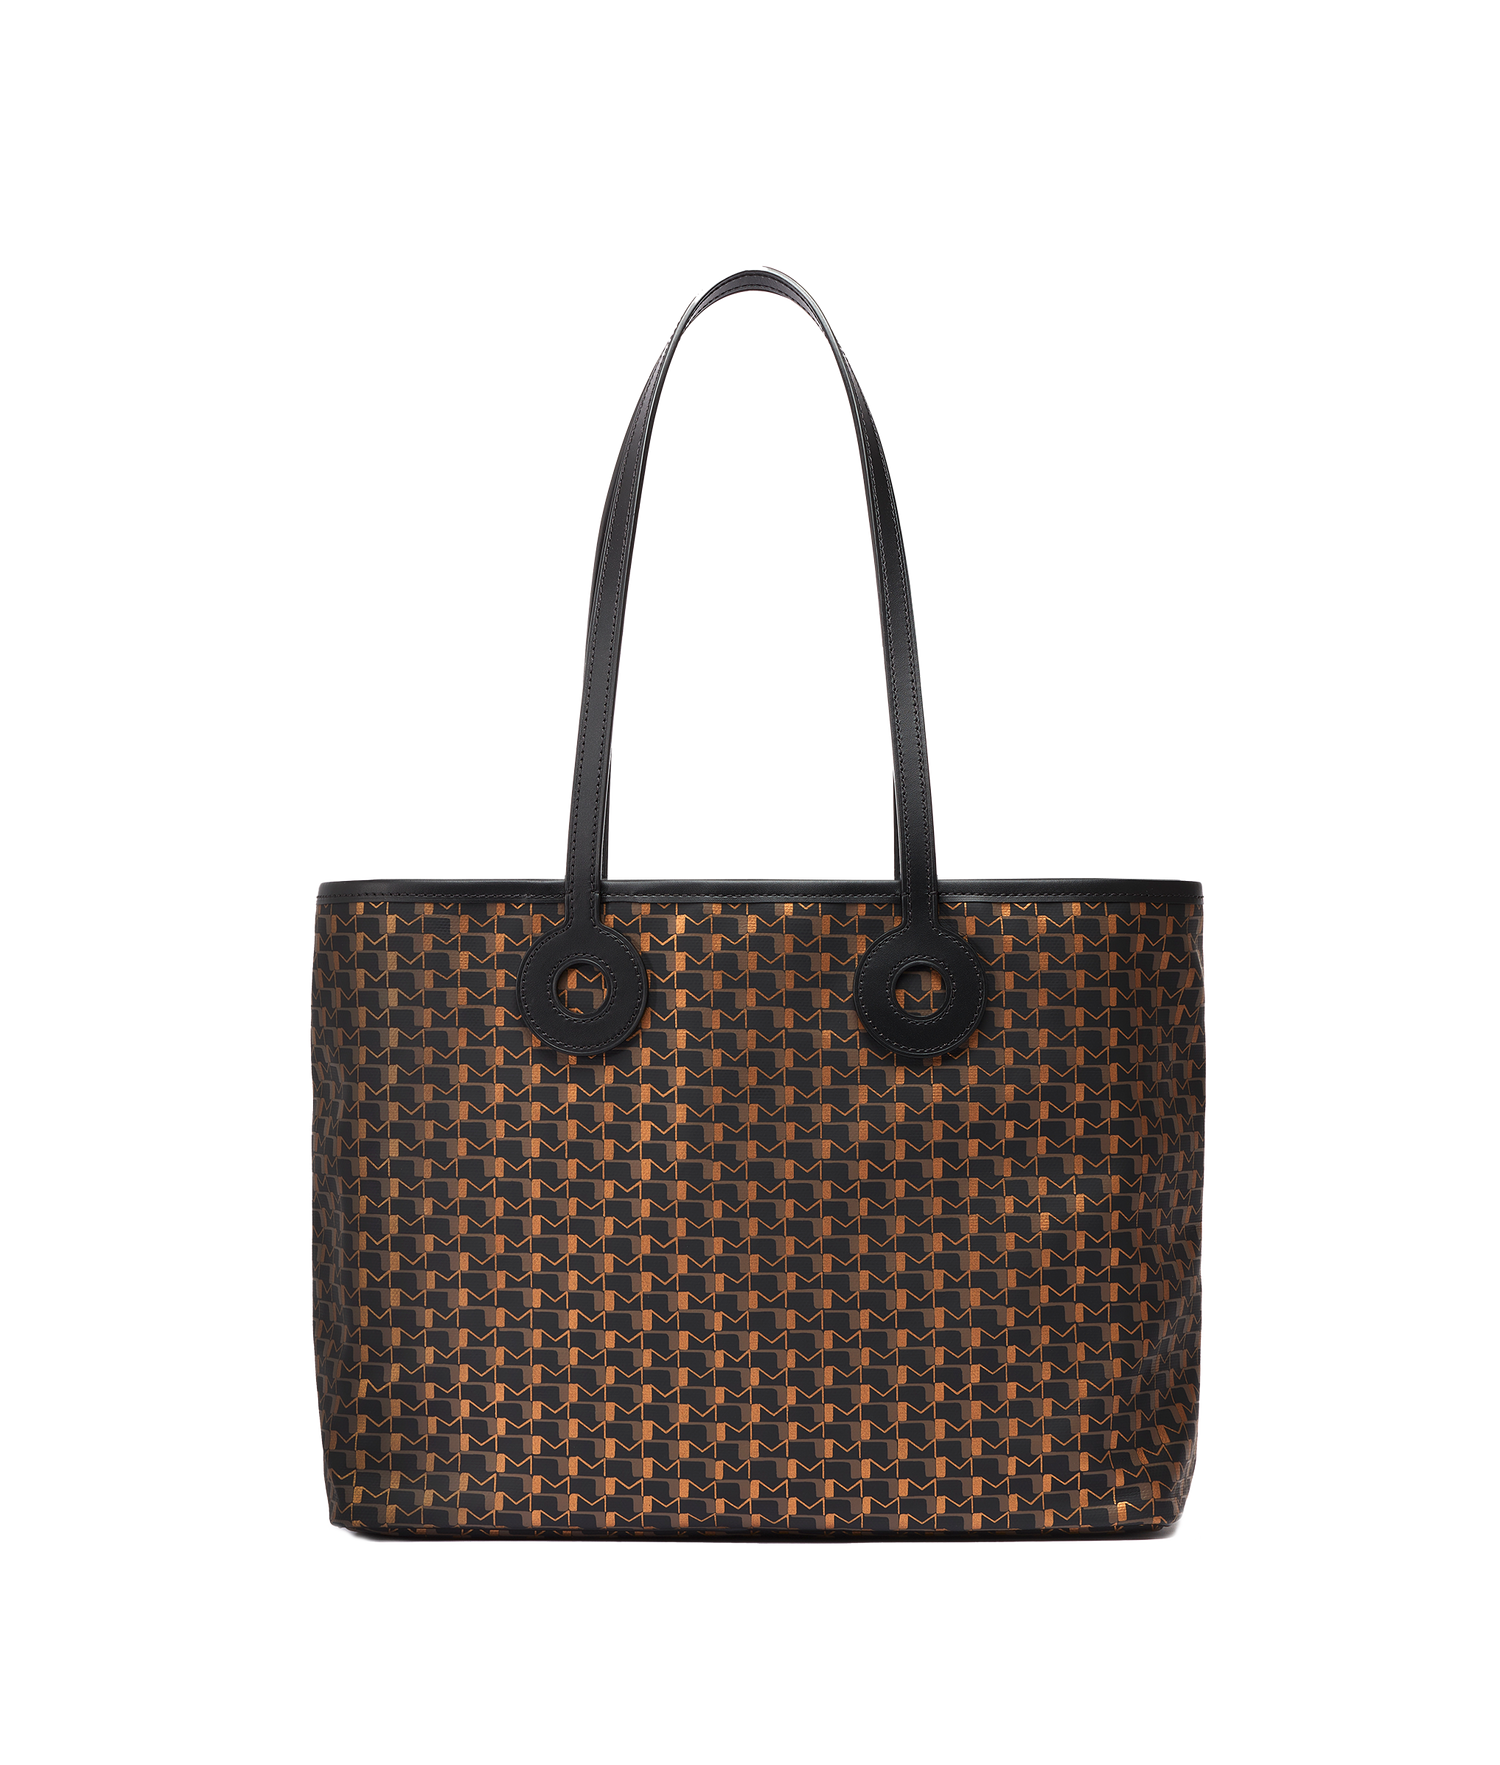 MOYNAT Women's Monogram Leather Tote Bag Brown Made in France